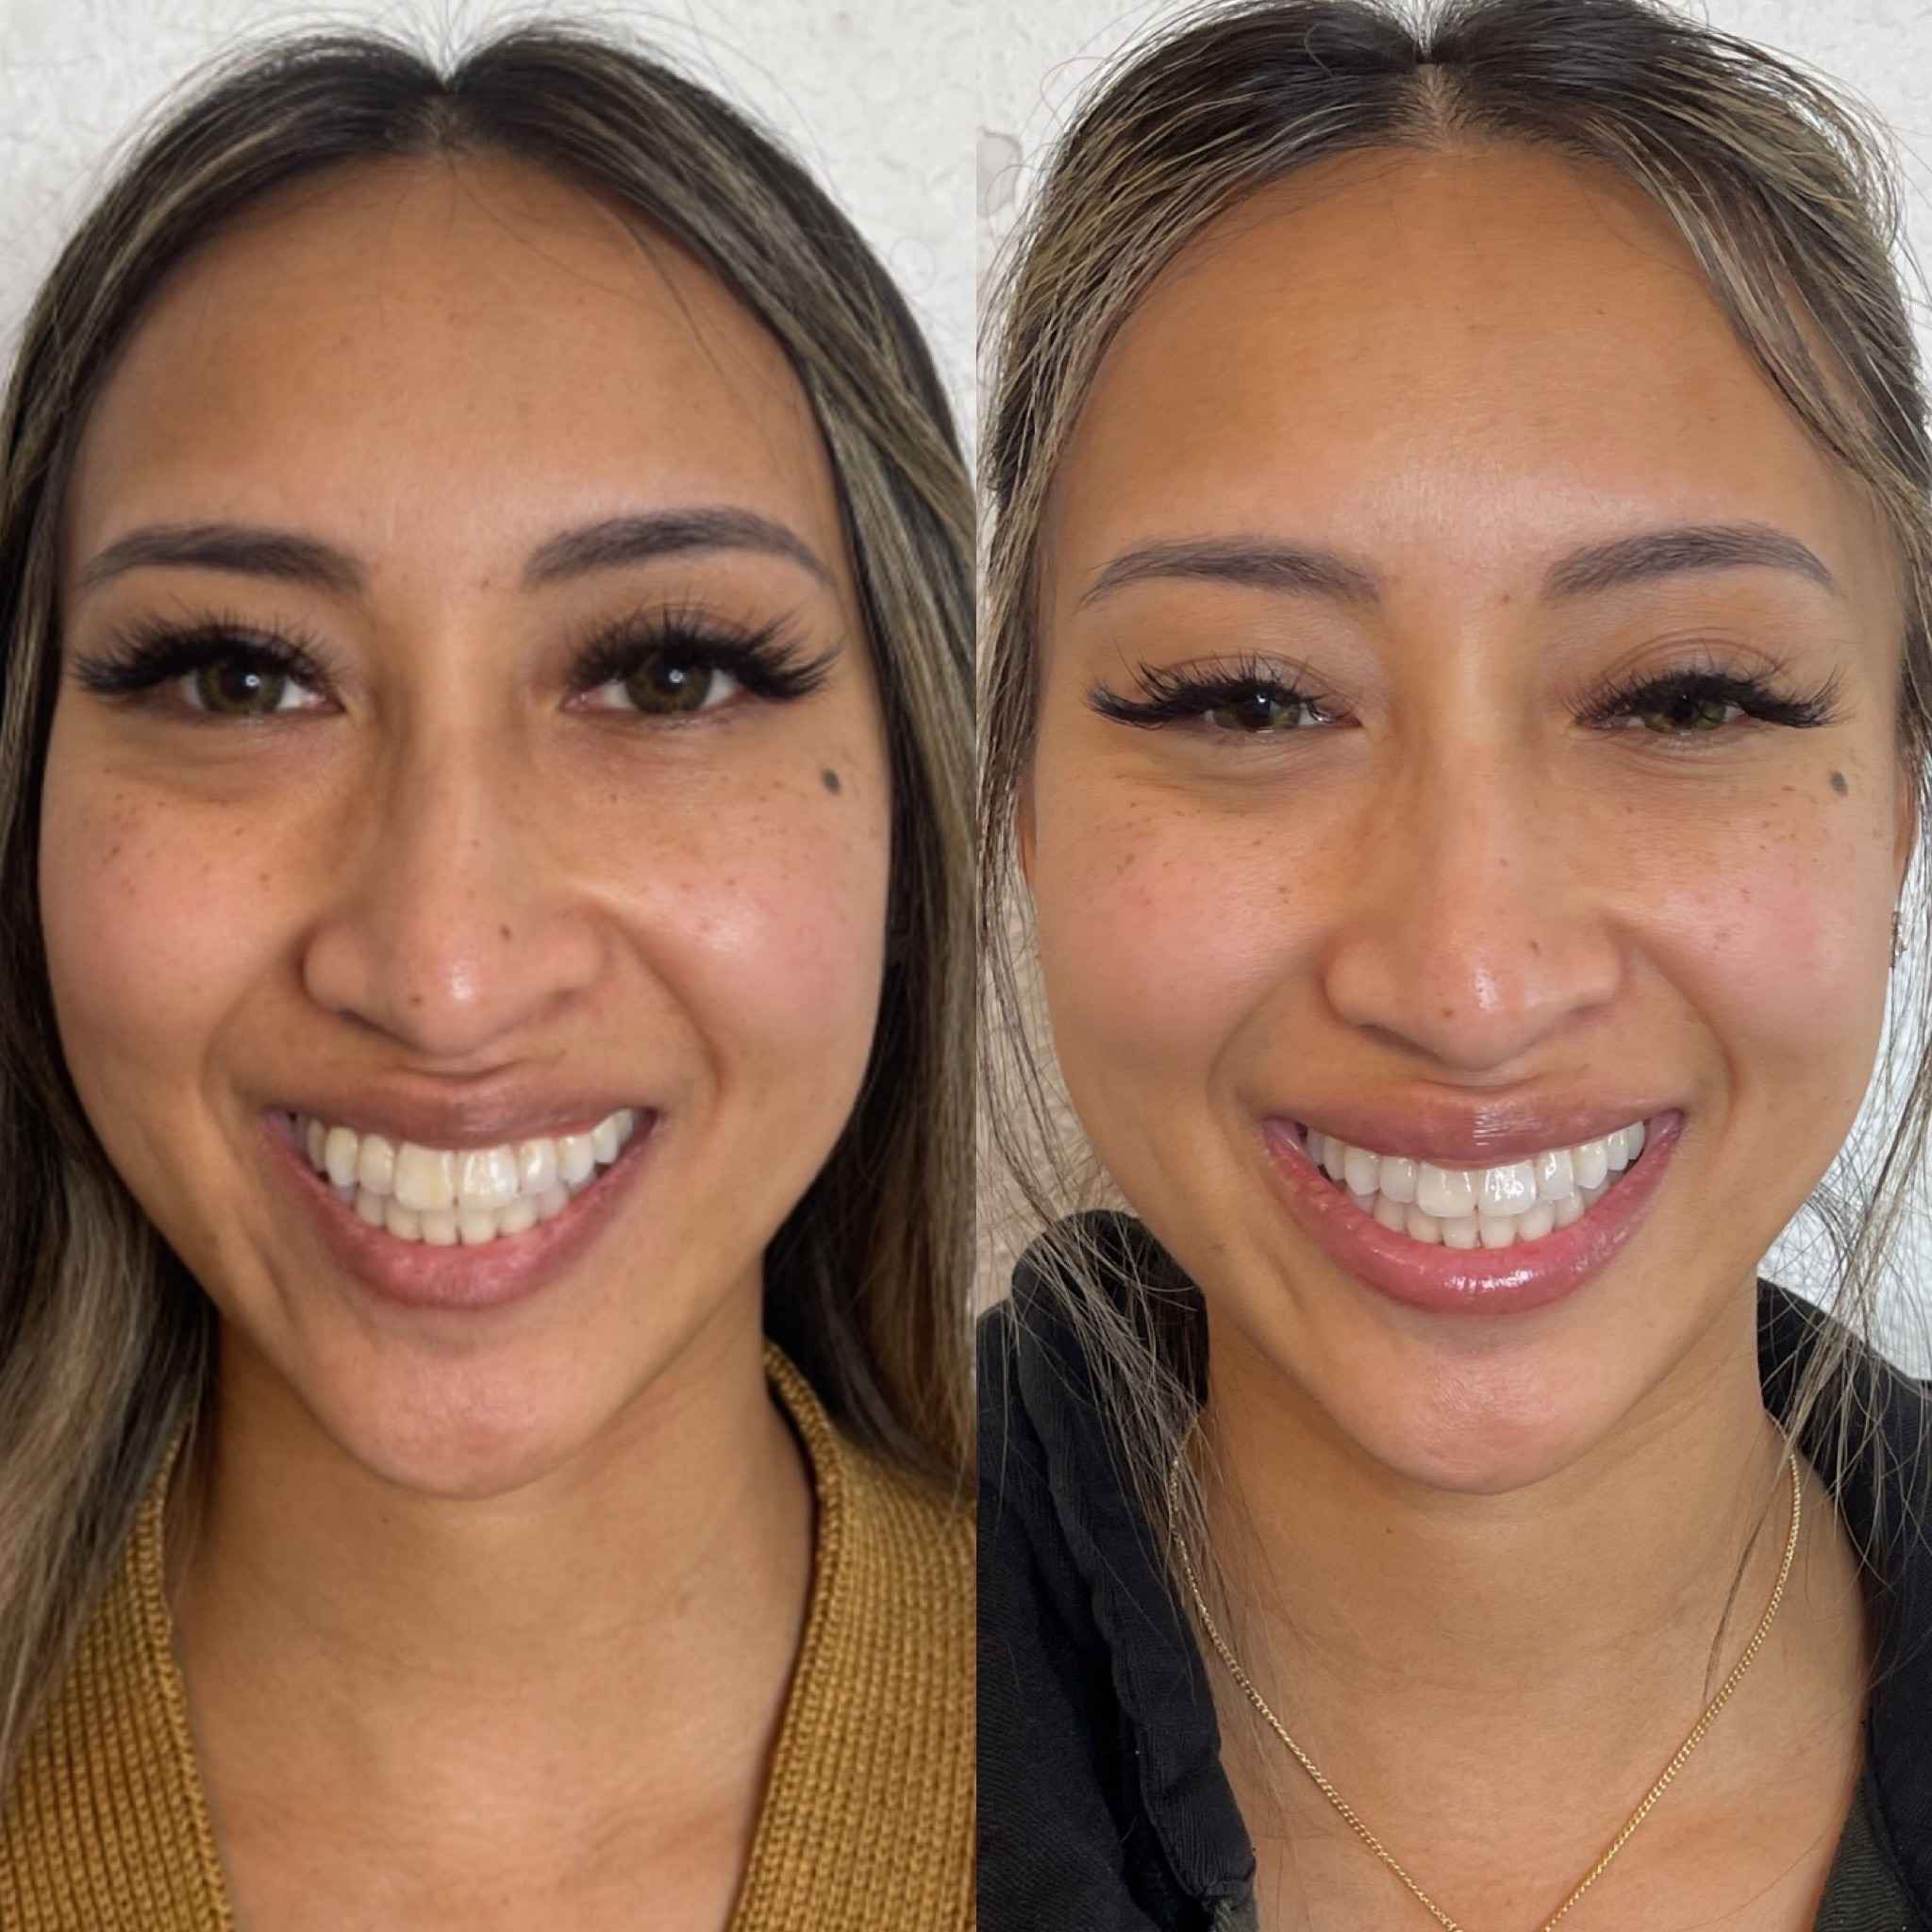 Before and After Fillers Treatment | Onyx Medical Aesthetics | Homann Dr. S.E. suite B Lacey, WA